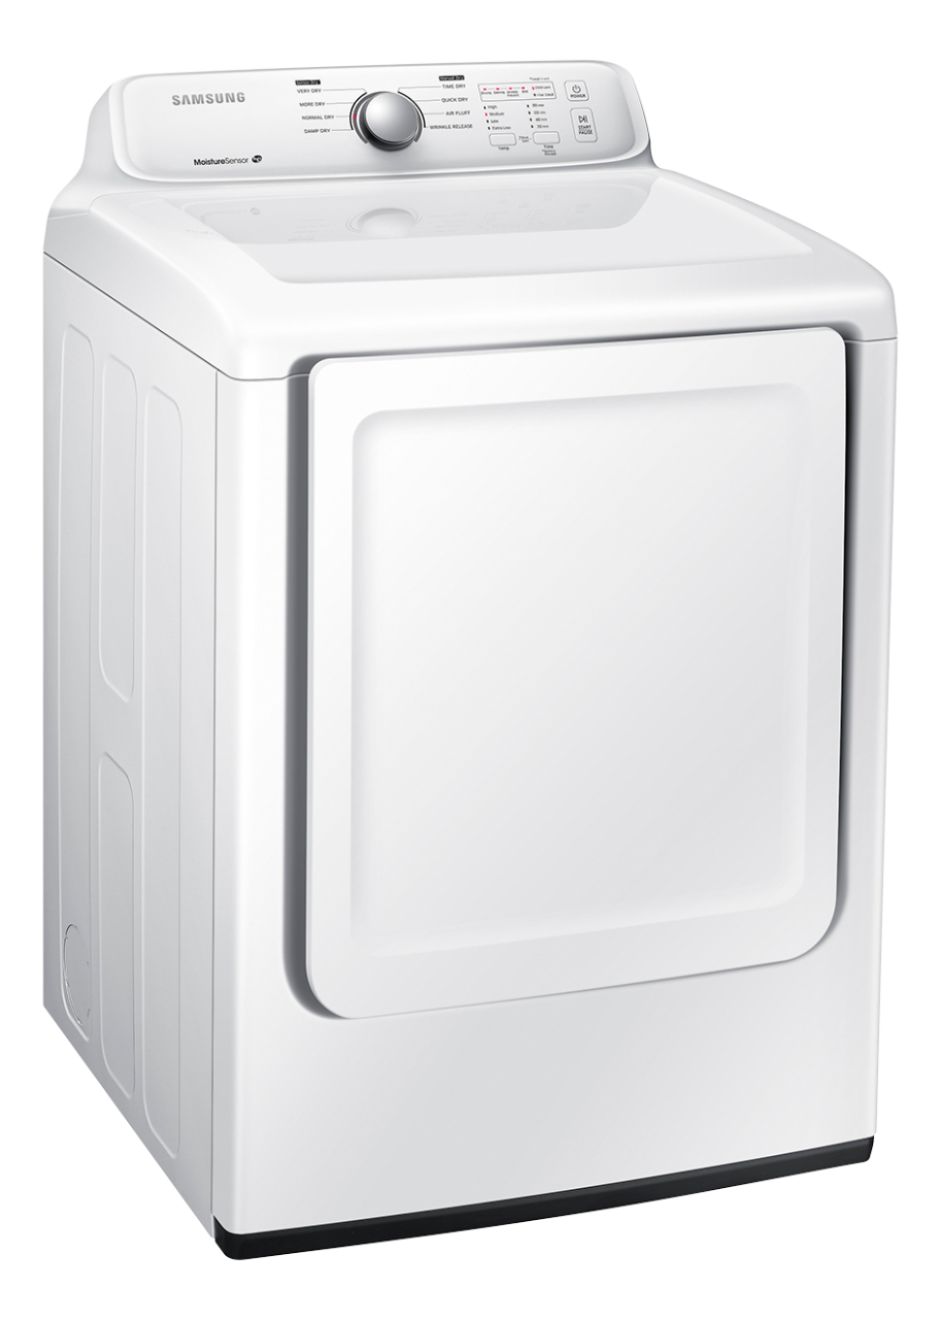 Angle View: Samsung - 7.2 Cu. Ft. Electric Dryer with 8 Cycles - White